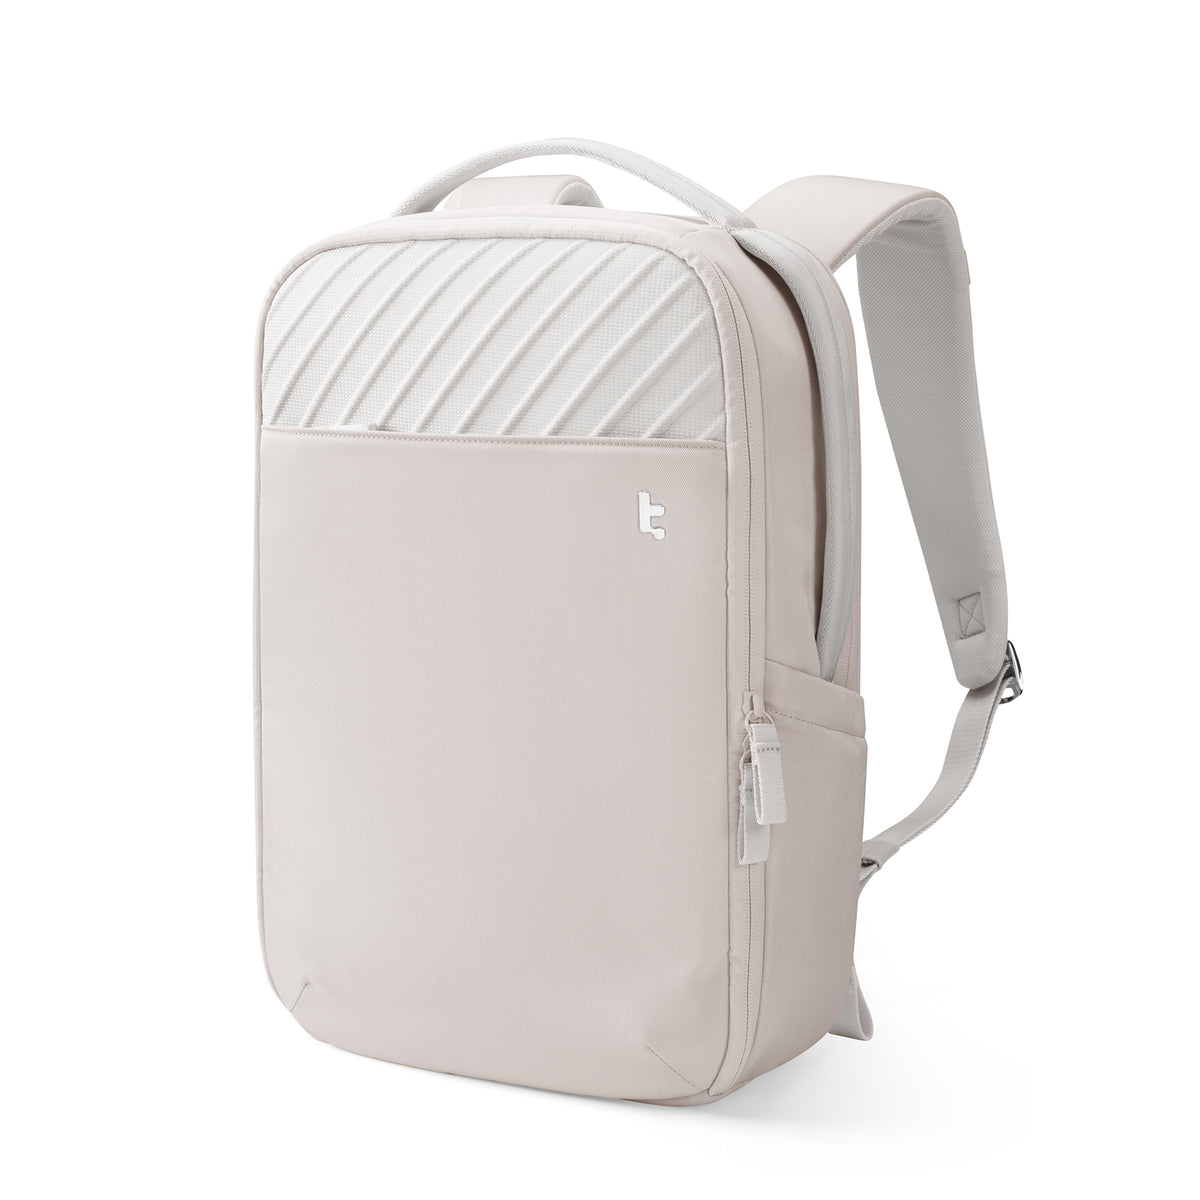 tomtoc 15.6 Inch Voyage Laptop Backpack - White